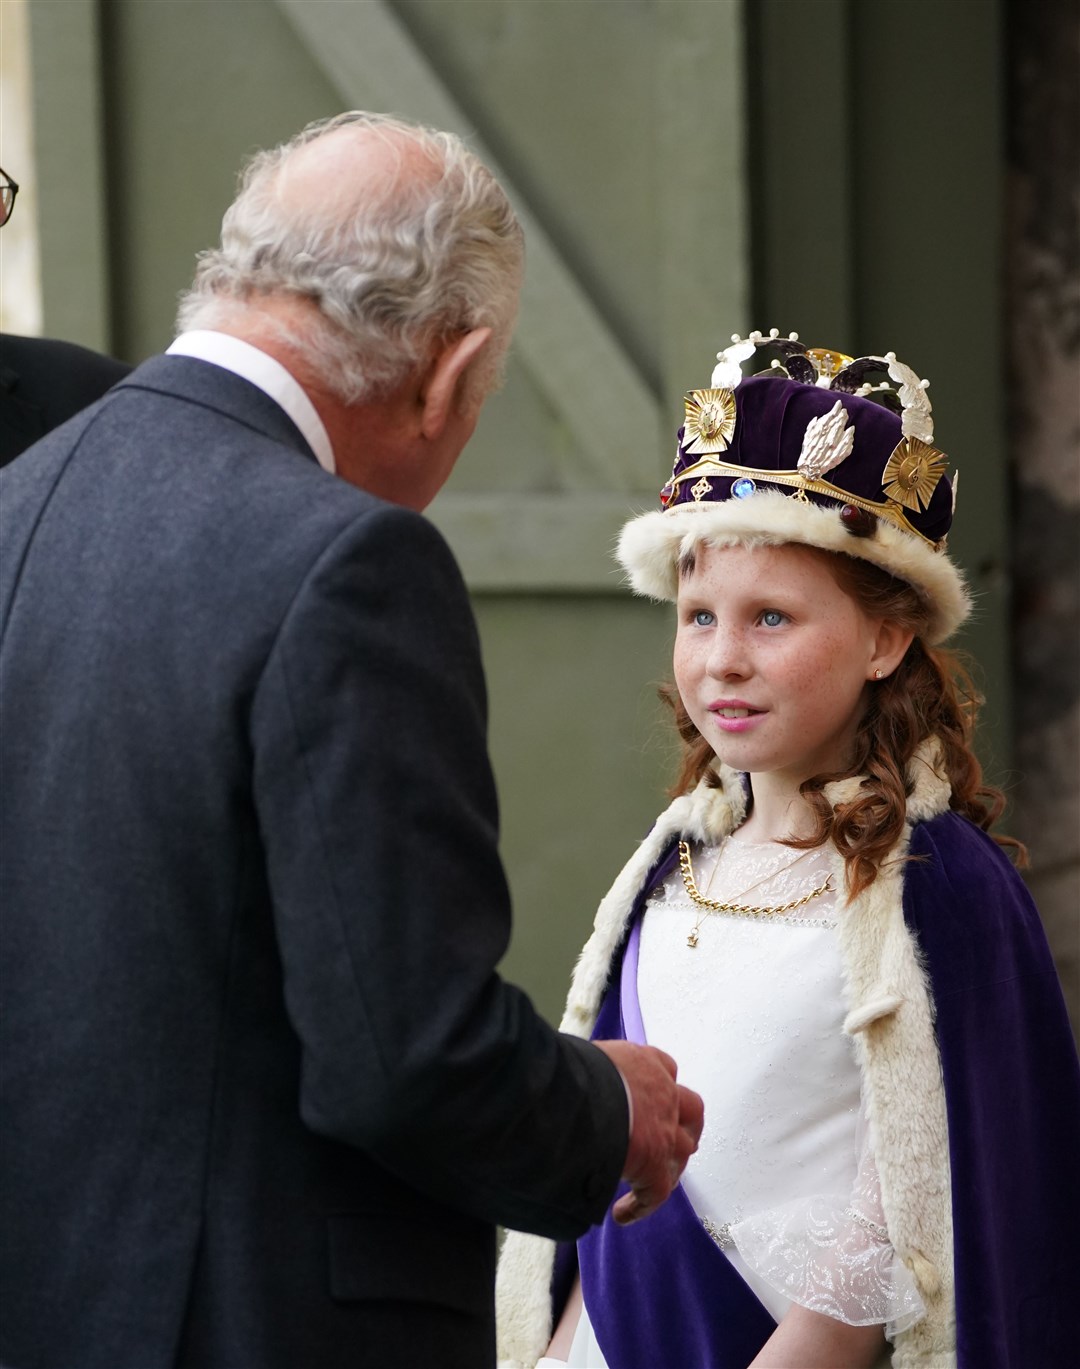 King Charles meets the Bo’ness Fair Queen, Lexi Scotland, during his visit to Kinneil House (Andrew Milligan/PA)